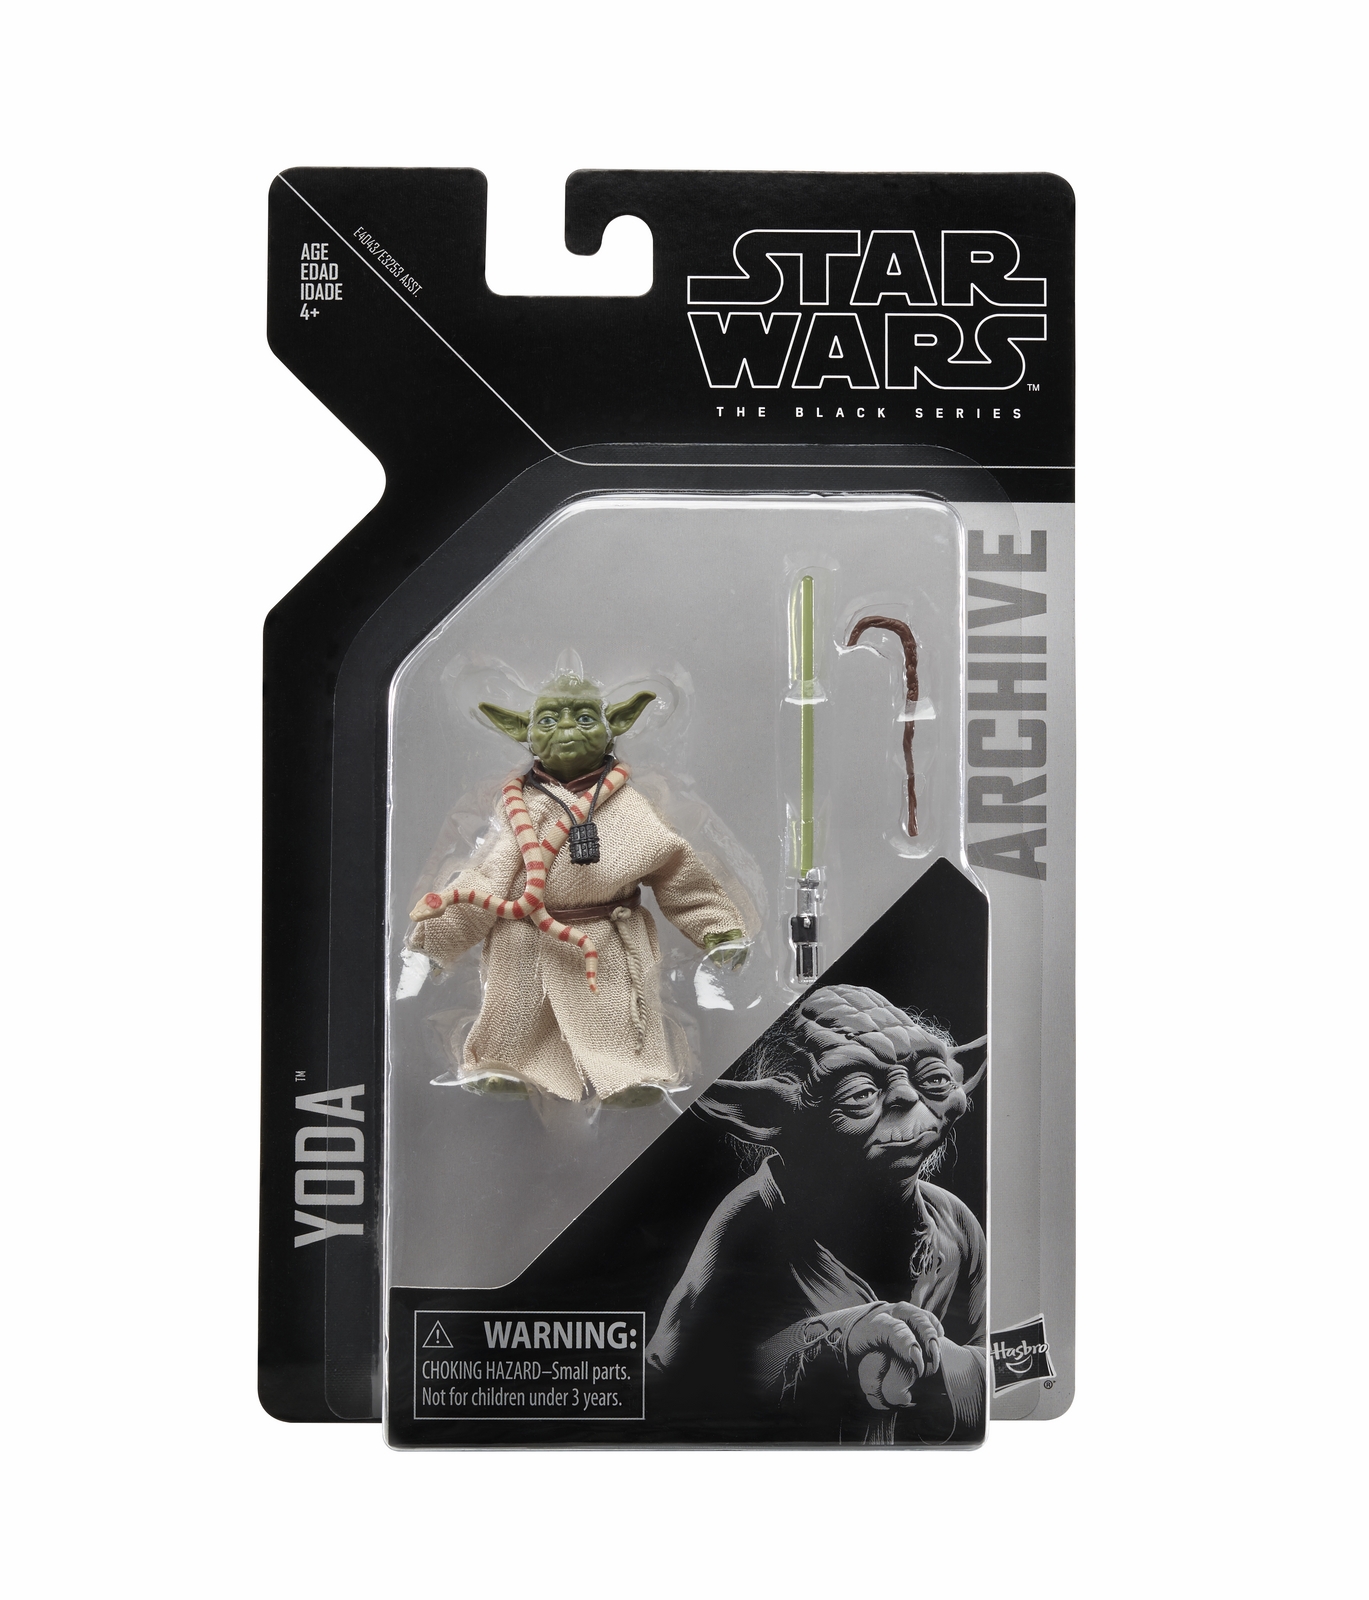 STAR WARS THE BLACK SERIES ARCHIVE 6-INCH Figure Assortment - Yoda (in pck)[1].jpg